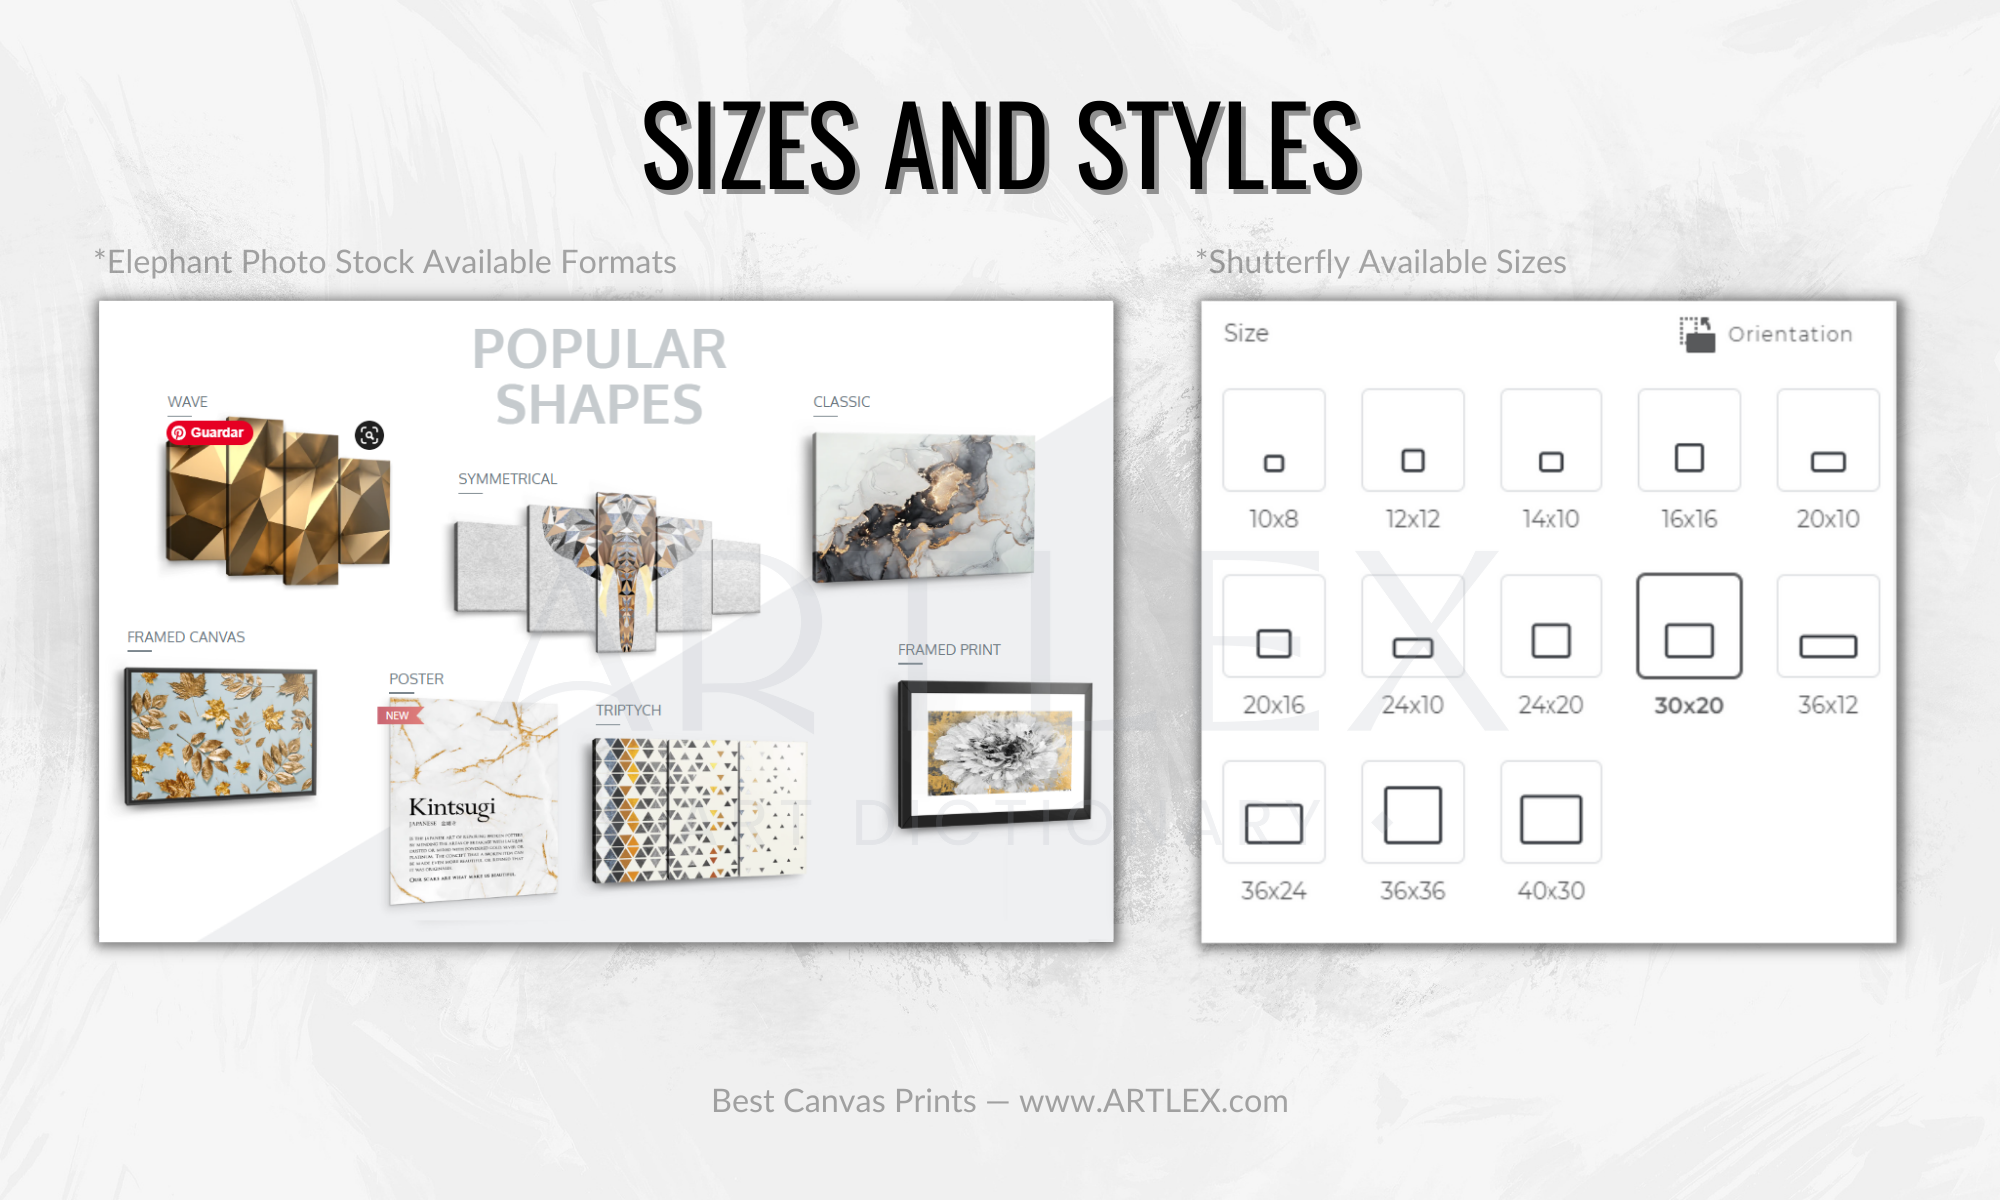 Sizes and Styles of Canvas Prints